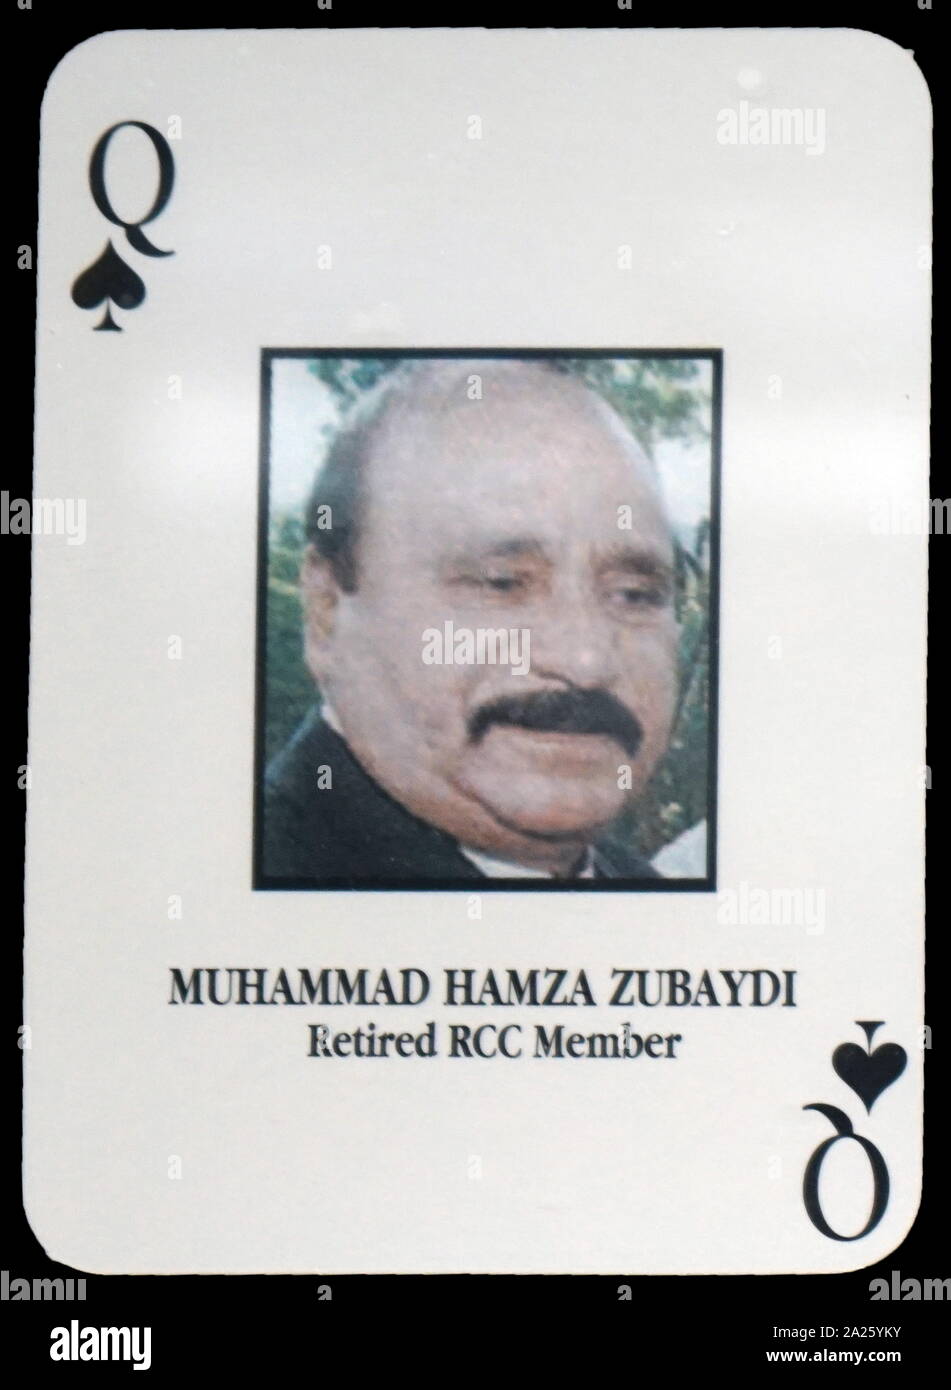 Most-wanted Iraqi playing cards - Muhammad Hamza Zubaydi (Retired RCC Member). The U.S. military developed a set of playing cards to help troop identify the most-wanted members of President Saddam Hussein's government during the 2003 invasion of Iraq. Stock Photo